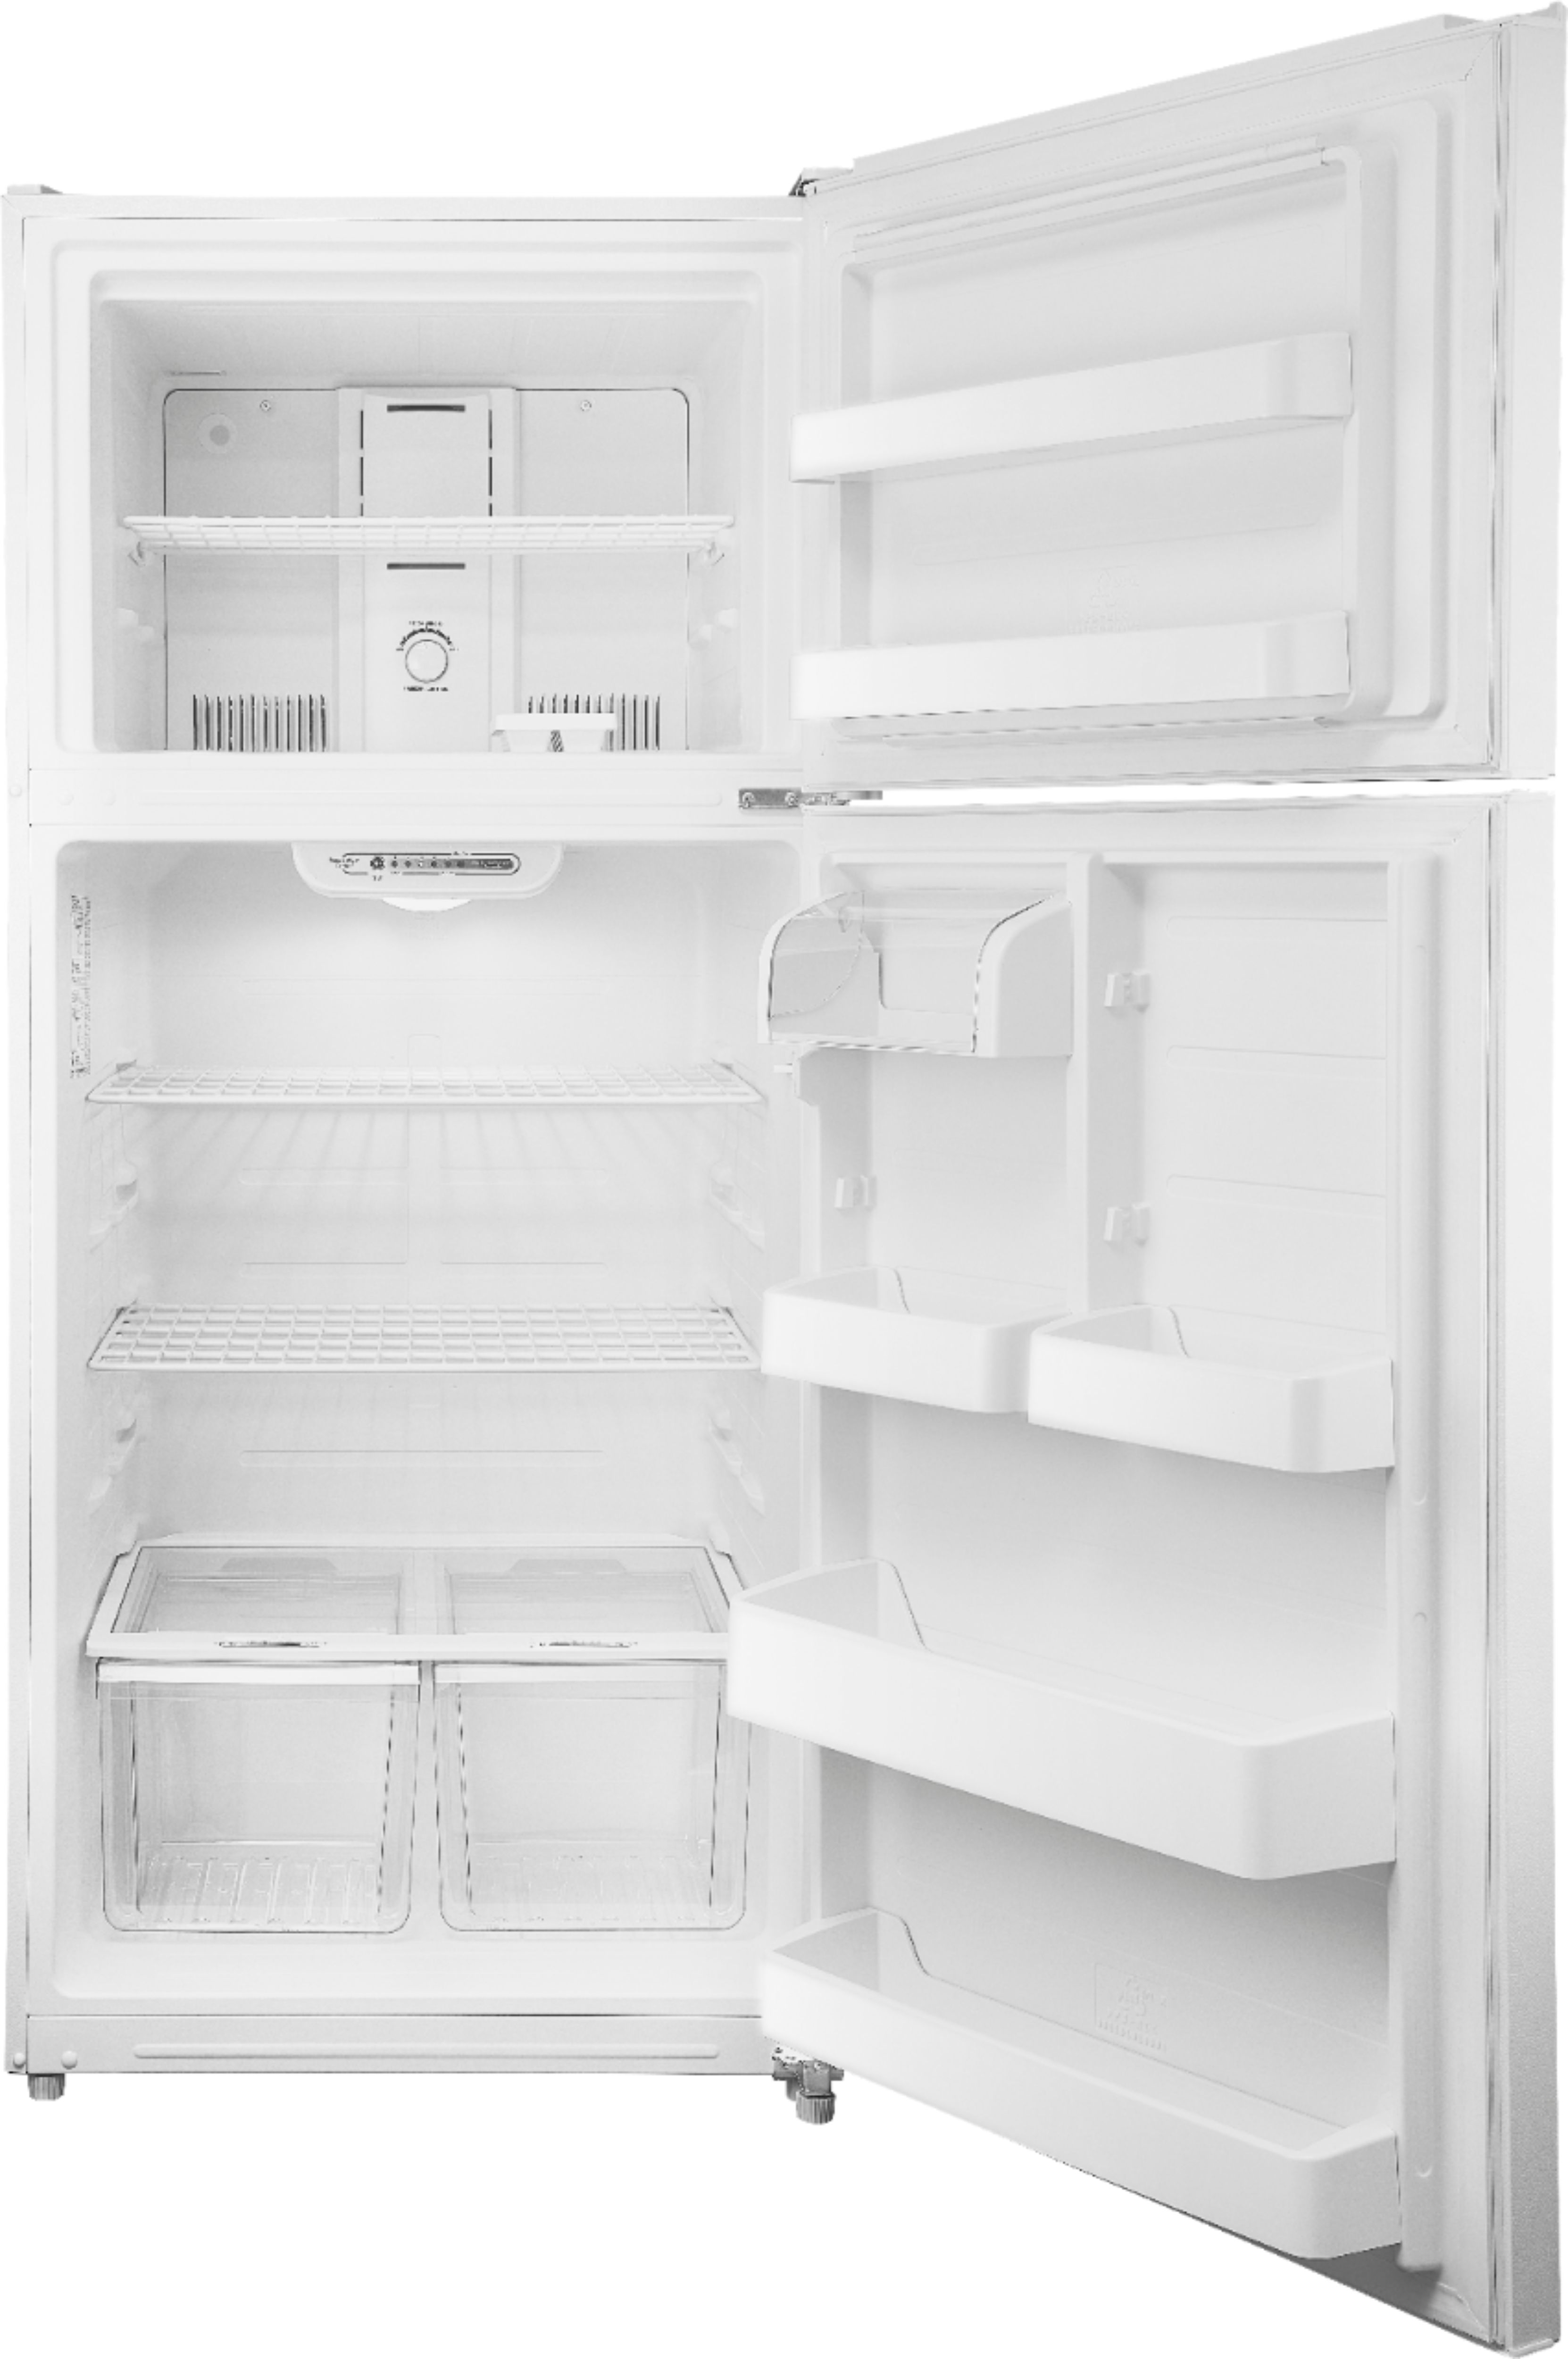 WRTG18HBWCD by Winia - 18.3 cu. ft. Top Mount Refrigerator - White